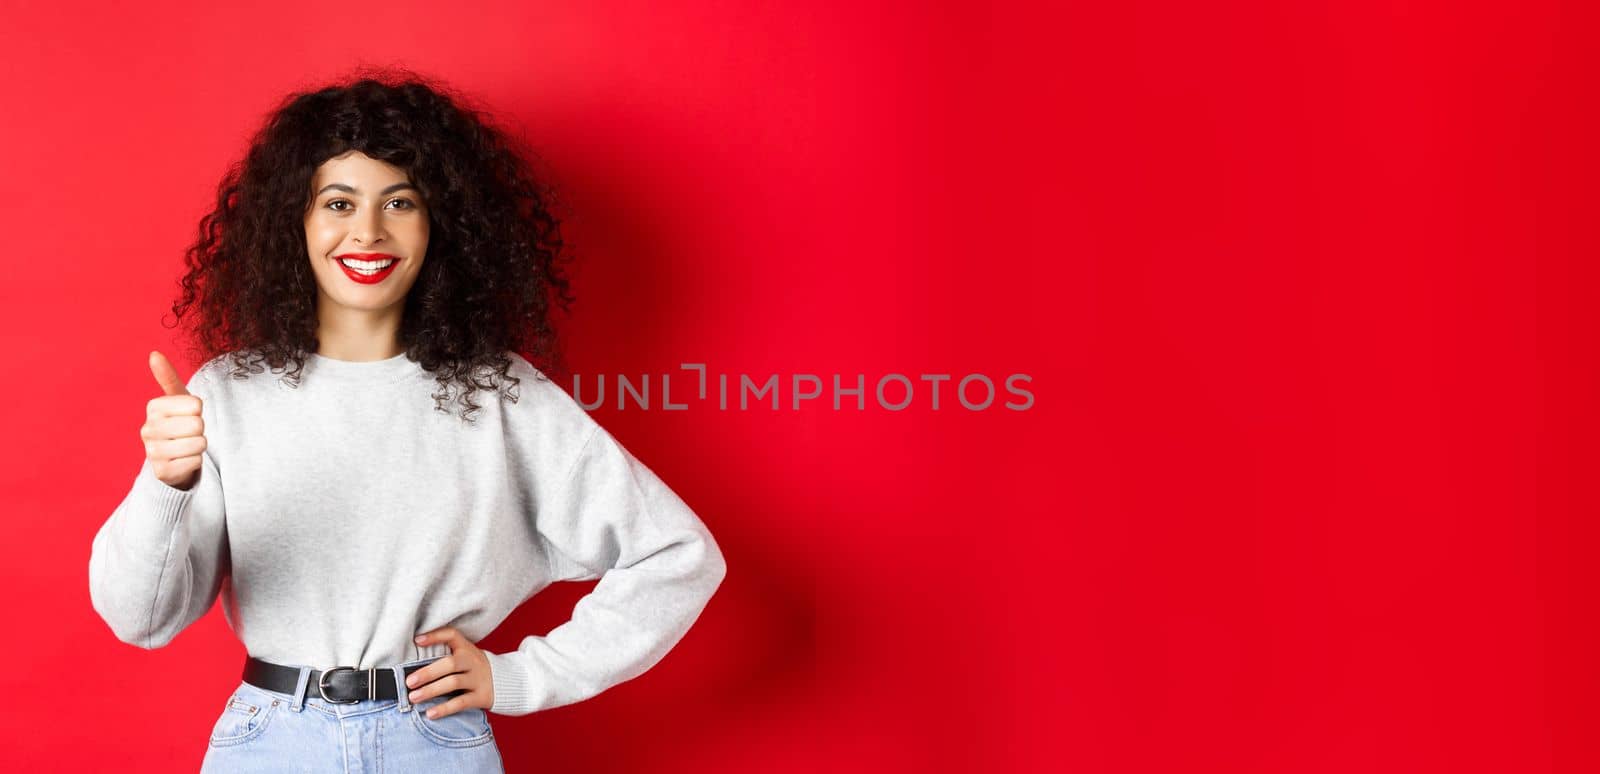 Enthusiastic young woman with curly hair, red lips, showing thumbs up and smiling in approval, praise good product, standing against red background.